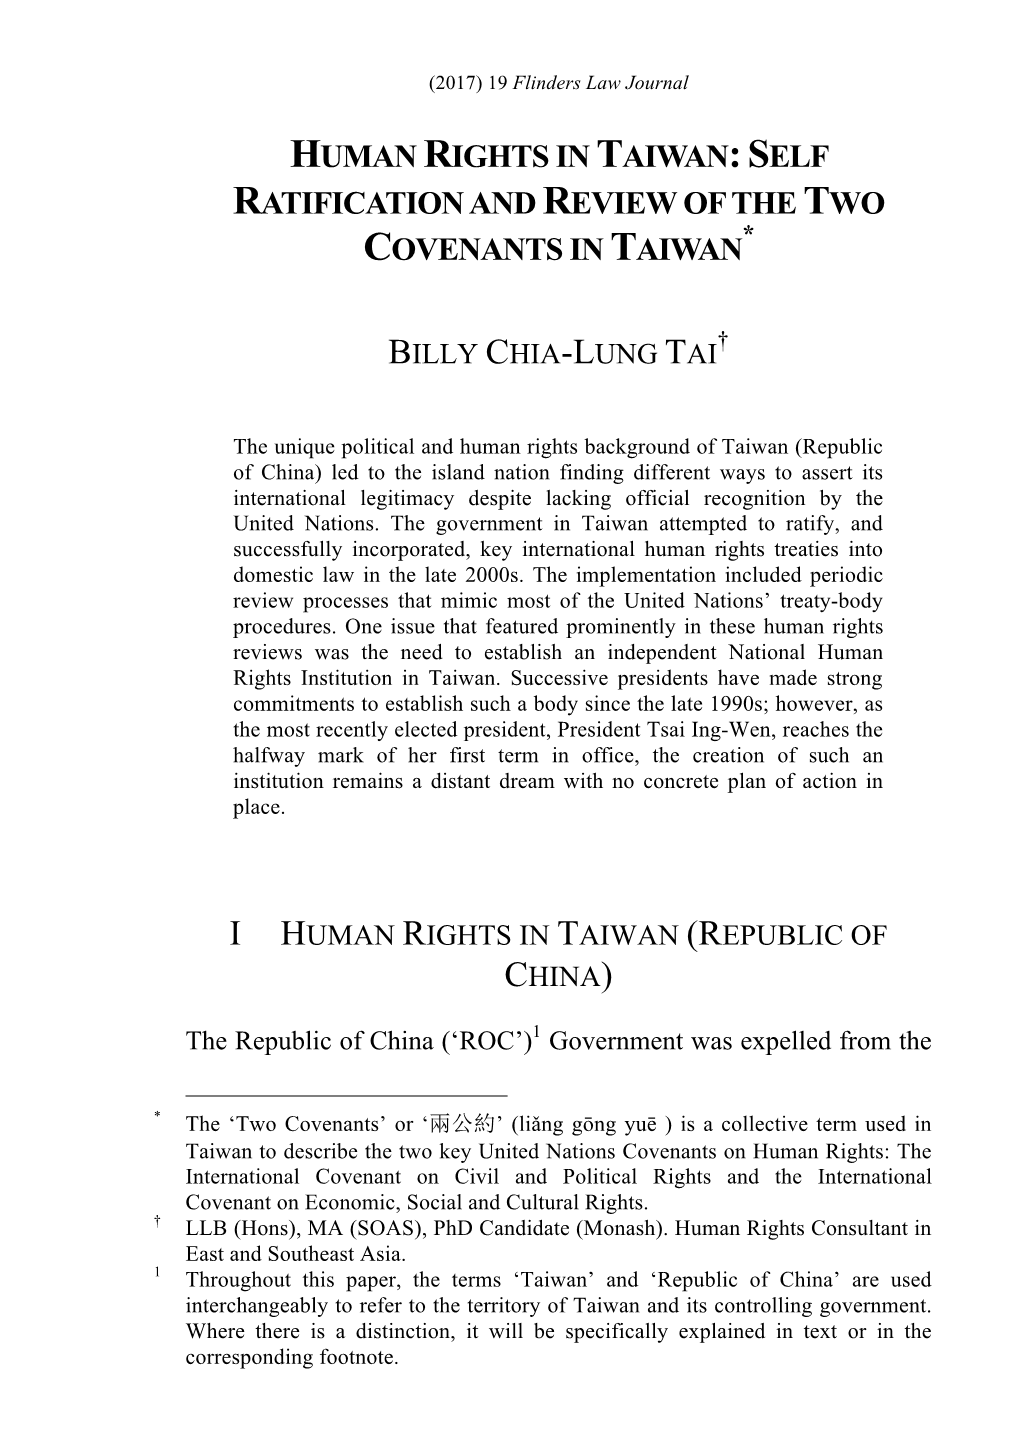 Human Rights in Taiwan:Self Ratification And